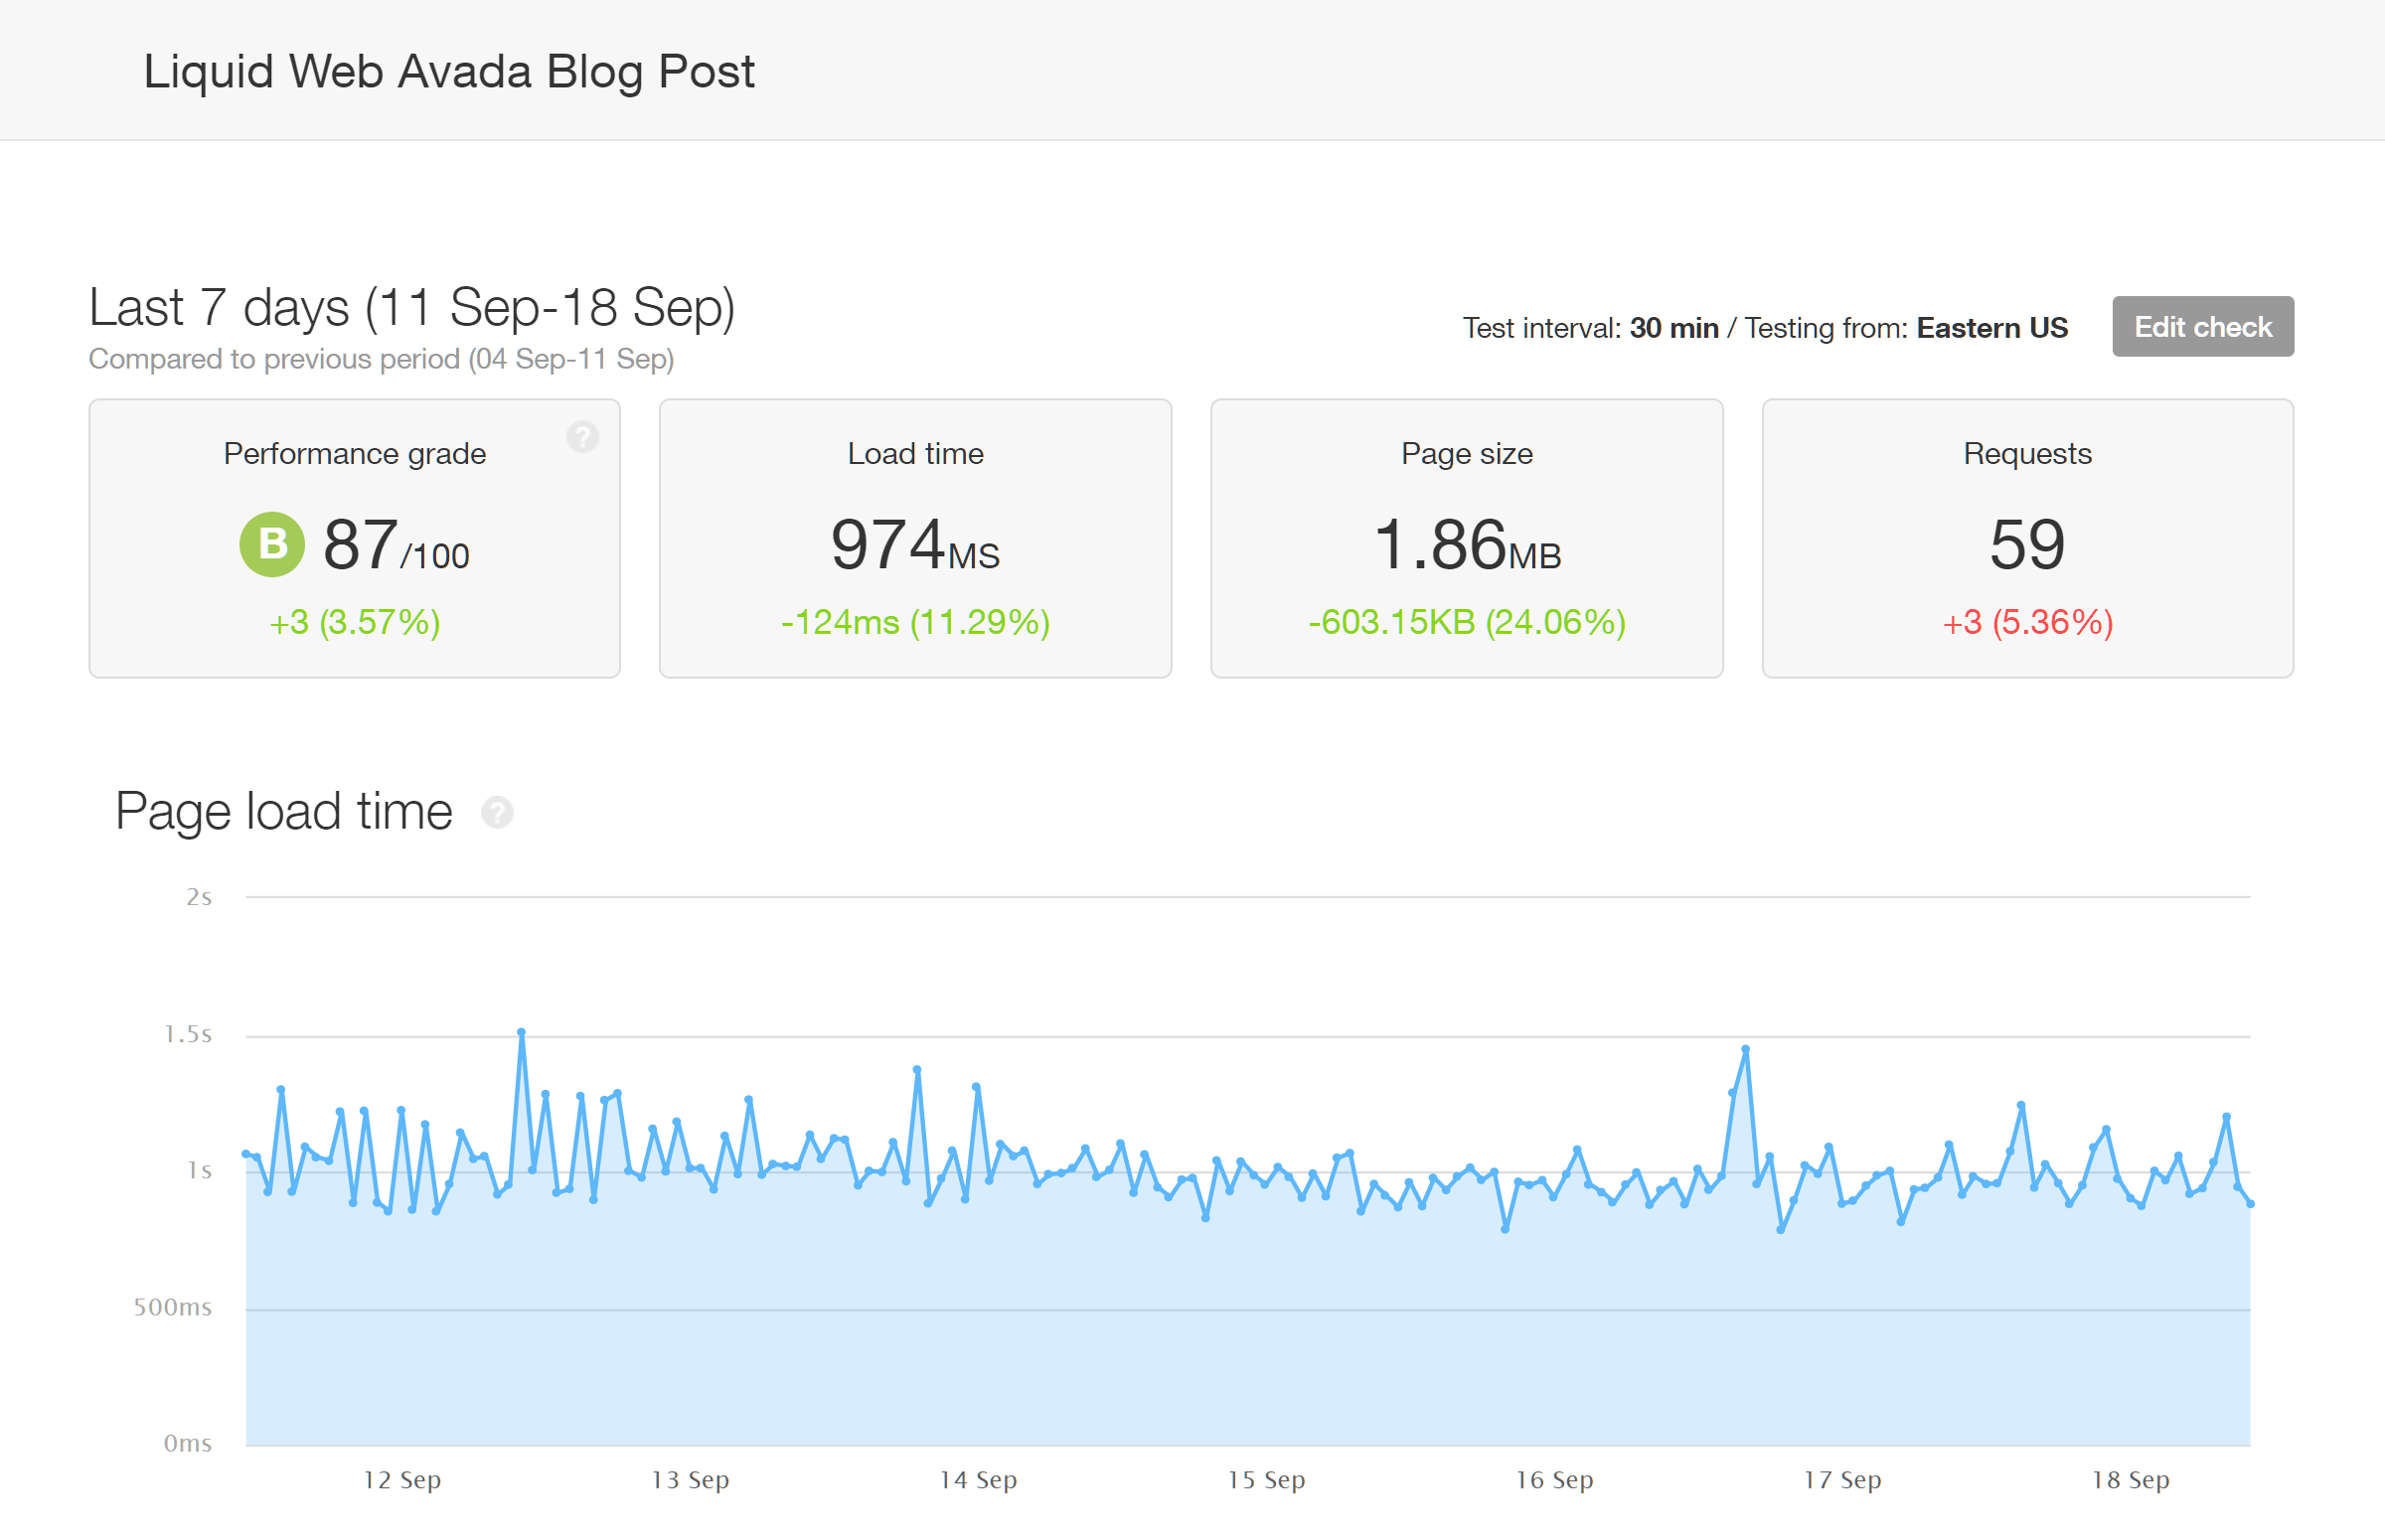 Avada Blog Post Site Speed Results